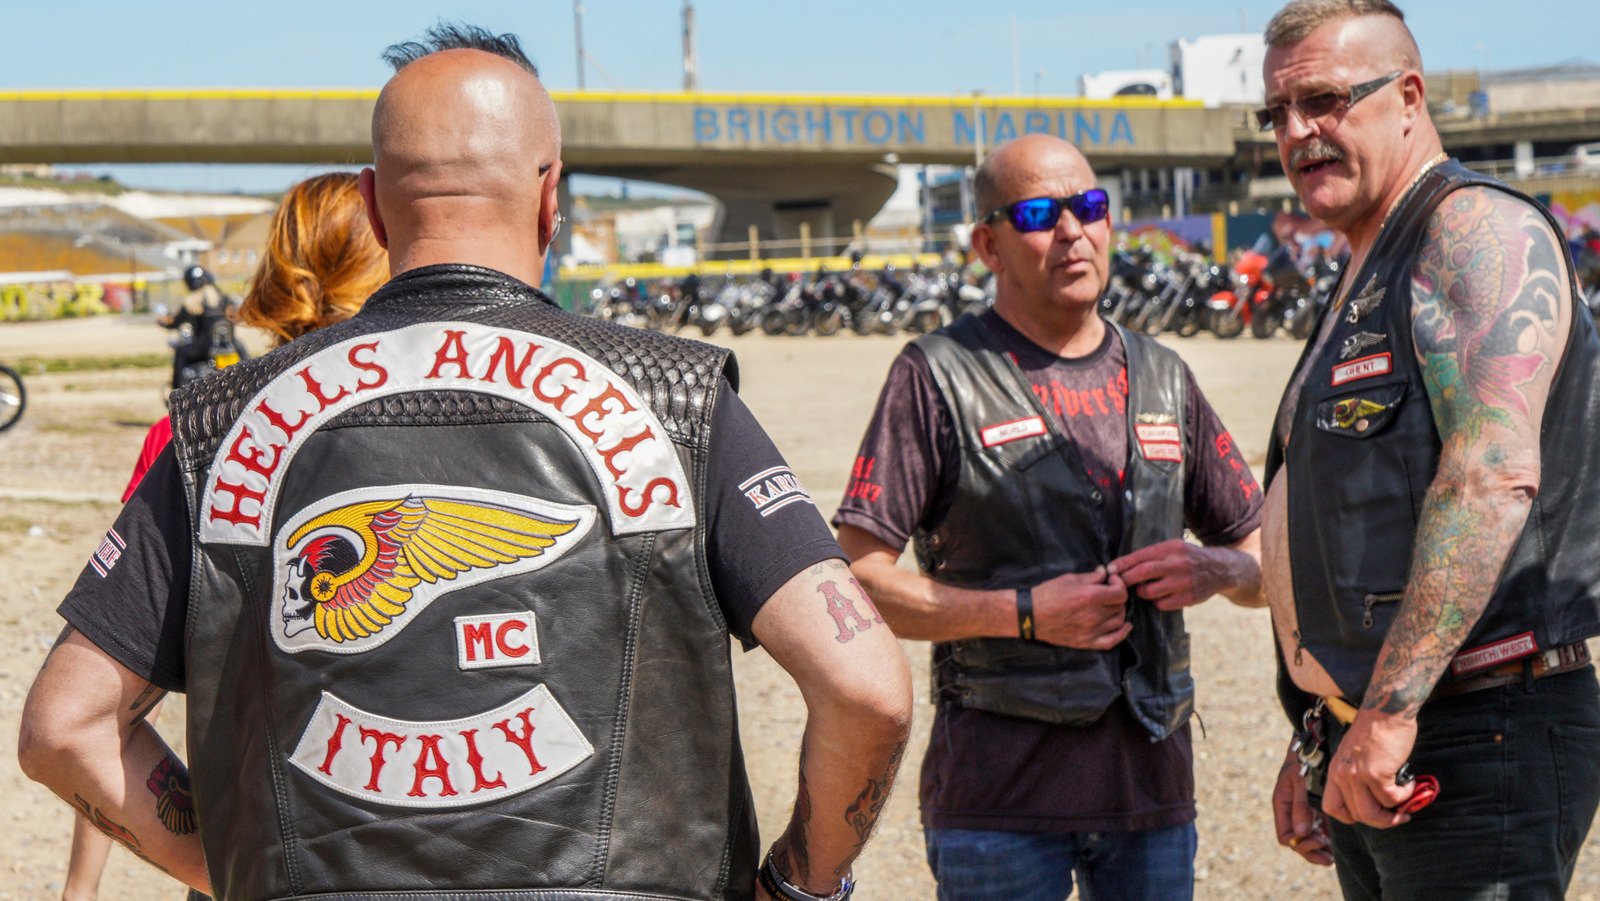 The Most Dangerous Motorcycle Clubs In The World - Grunge